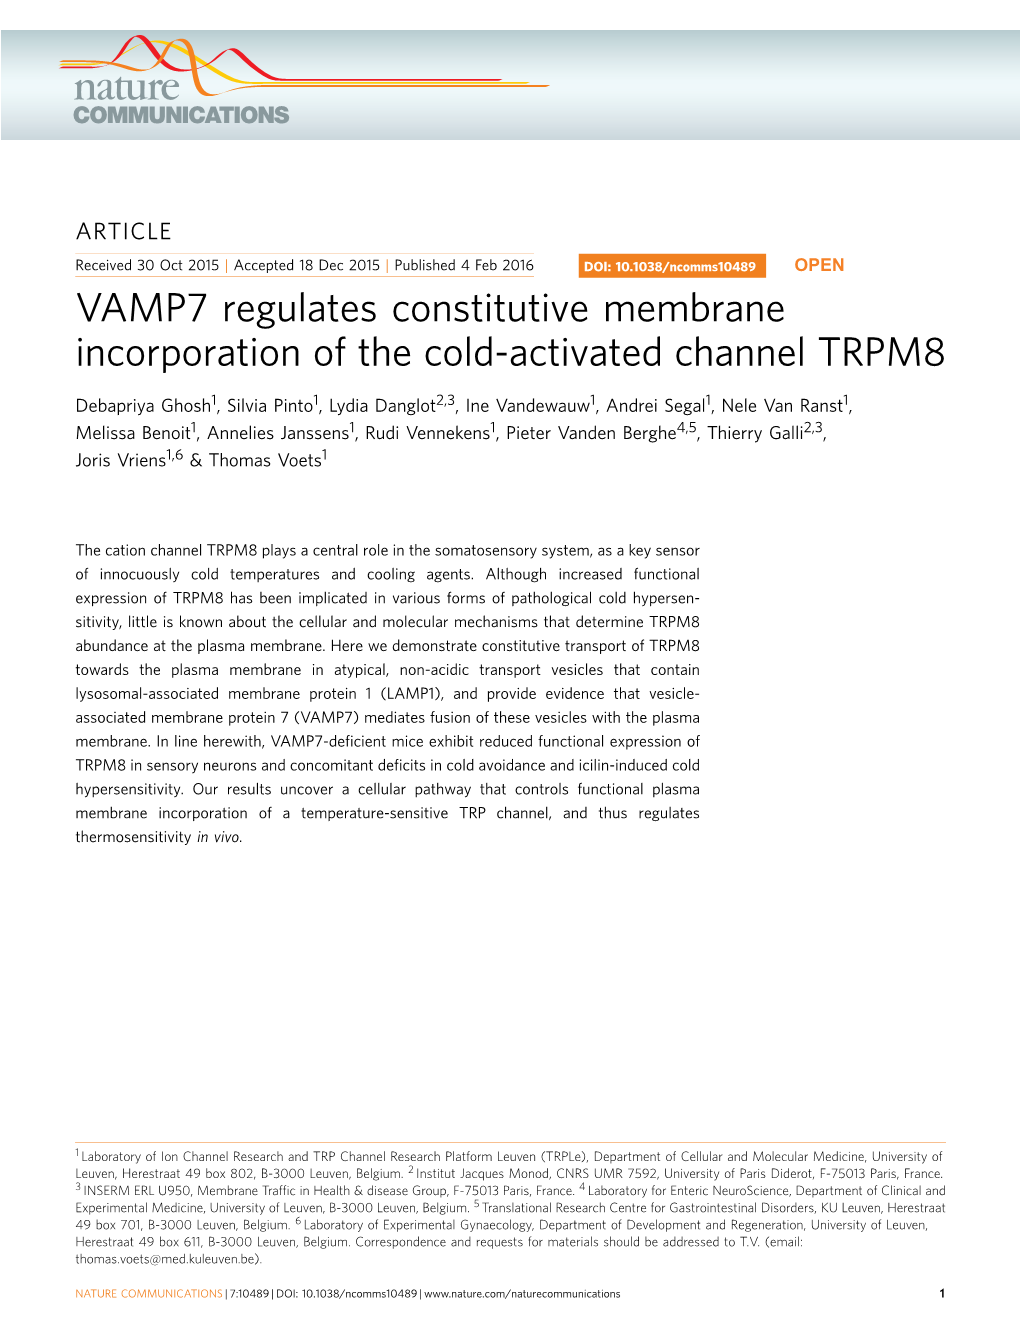 VAMP7 Regulates Constitutive Membrane Incorporation of the Cold-Activated Channel TRPM8